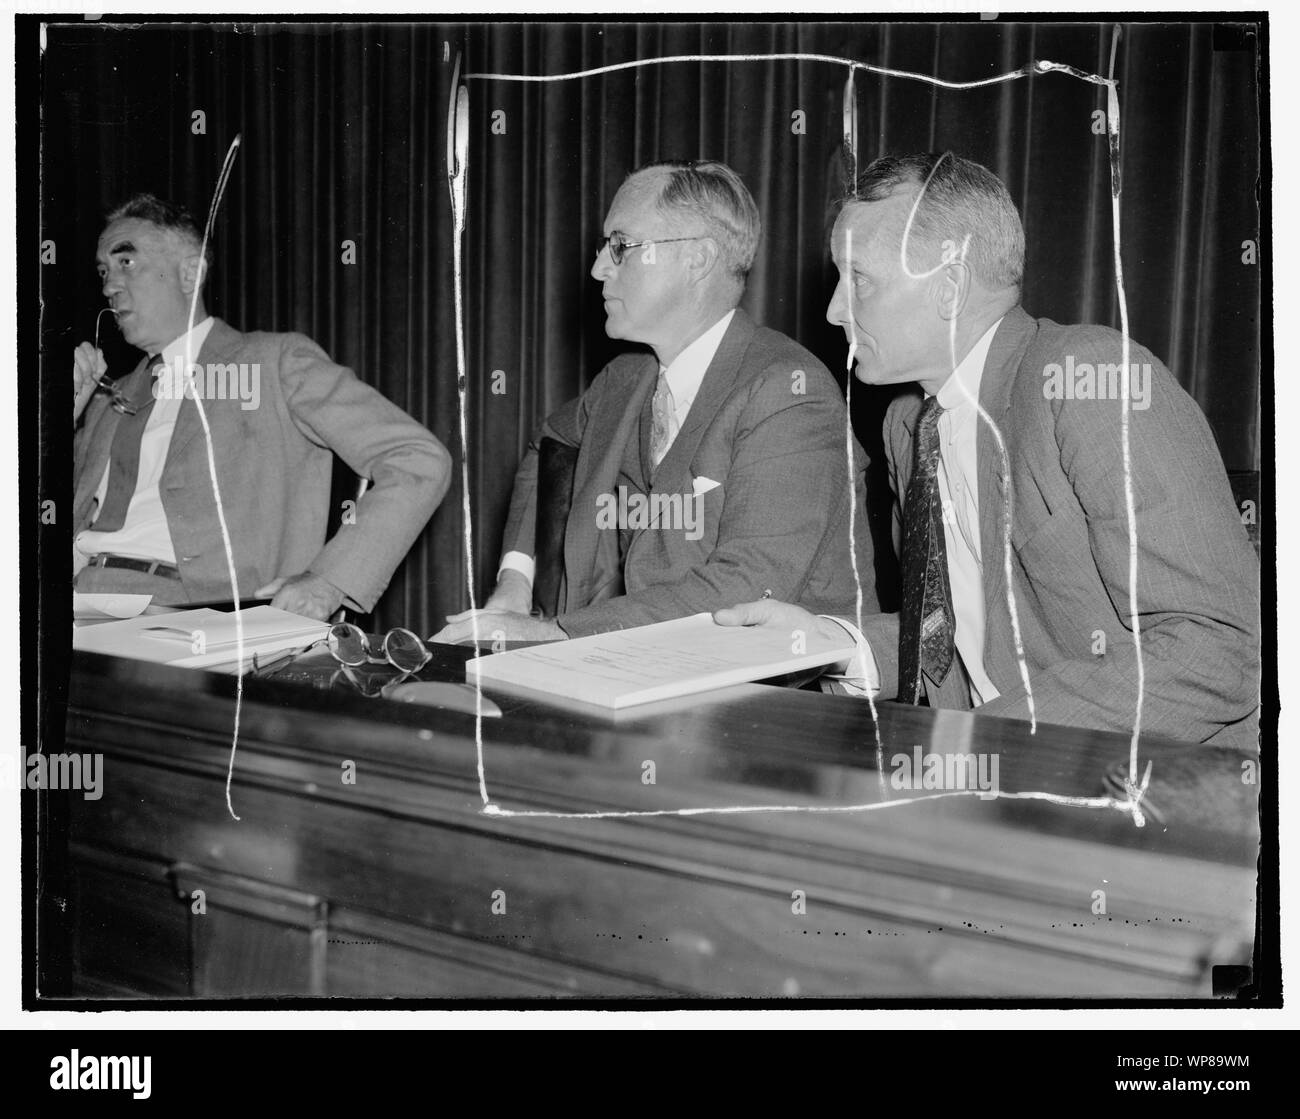 Listen to maritime troubles. Washington, D.C. Aug. 23. Chairman Joseph P. Kennedy, (left) and Commissioner Emory S. Land listen intently as maritime labor chiefs testify at the initial hearing of the U.S. Maritime Commission today in efforts to determine methods to avoid costly industrial labor disputes which have hampered the American Merchant Marine. 8/23/37 Stock Photo